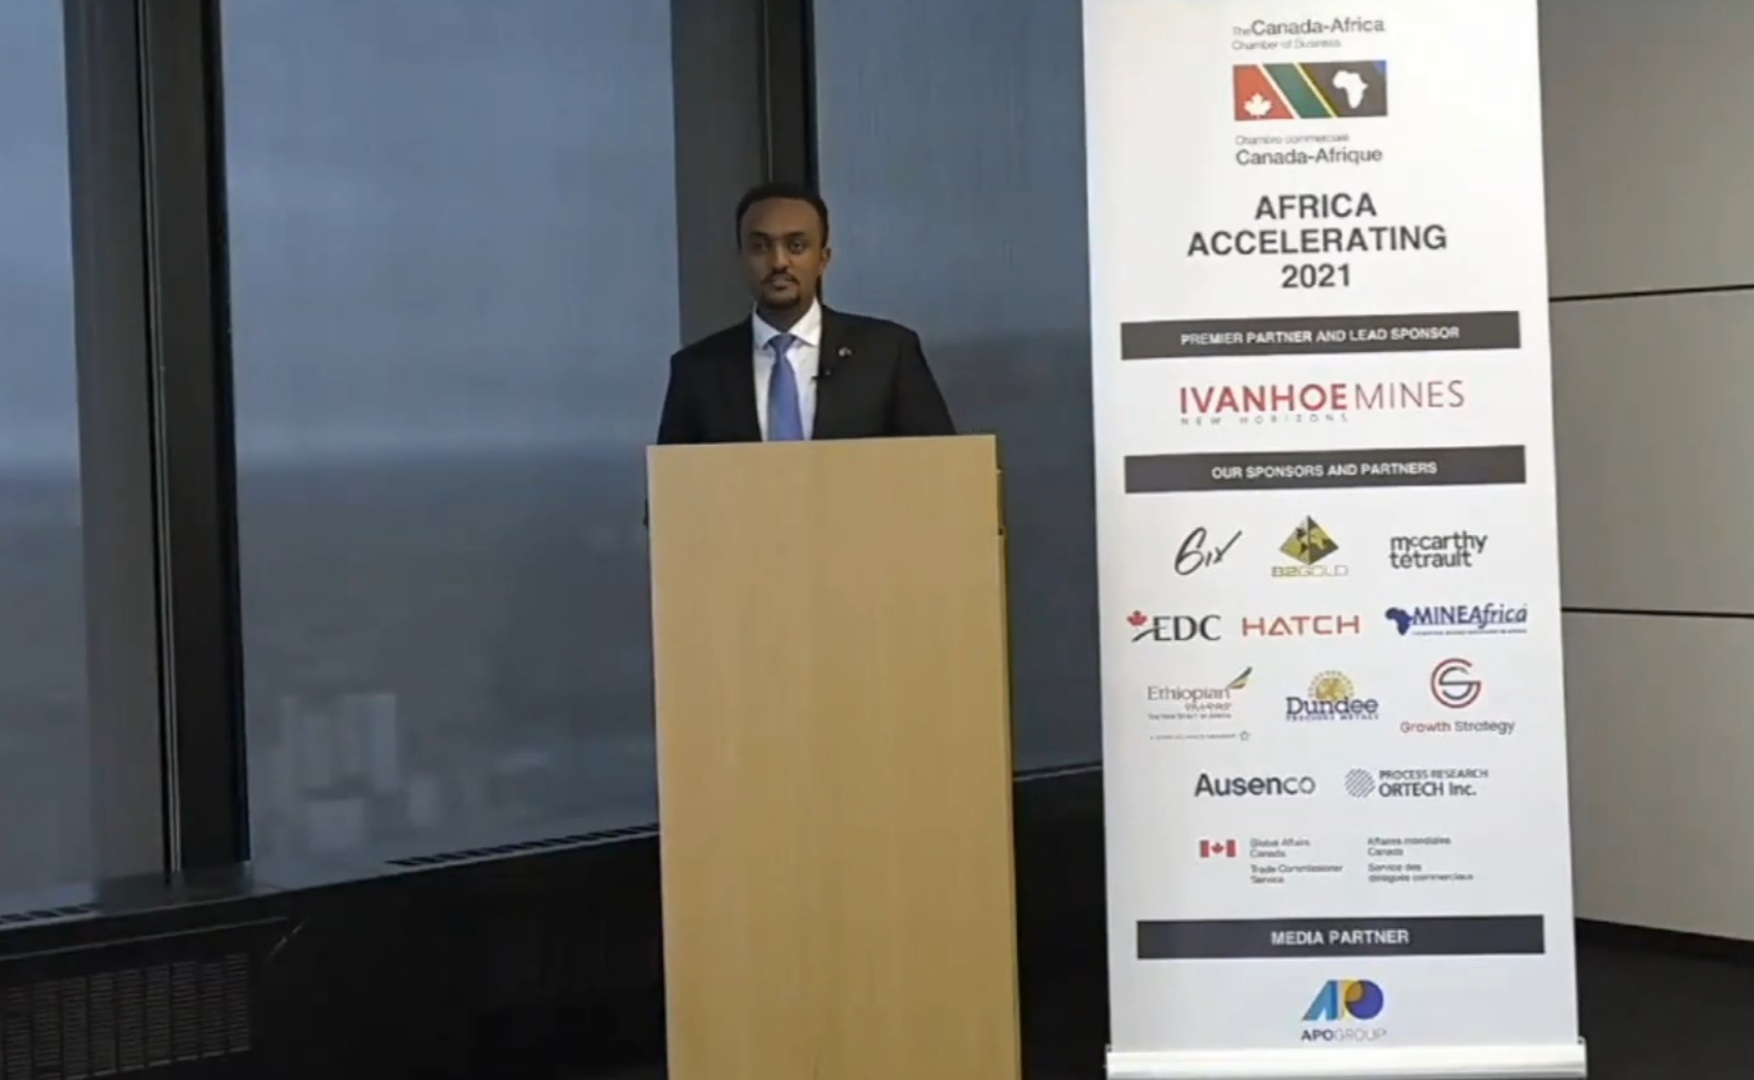 Ethiopian Airlines Key Driving Force For Africa’s Development – Managing Director of Ethiopian Airlines in Canada